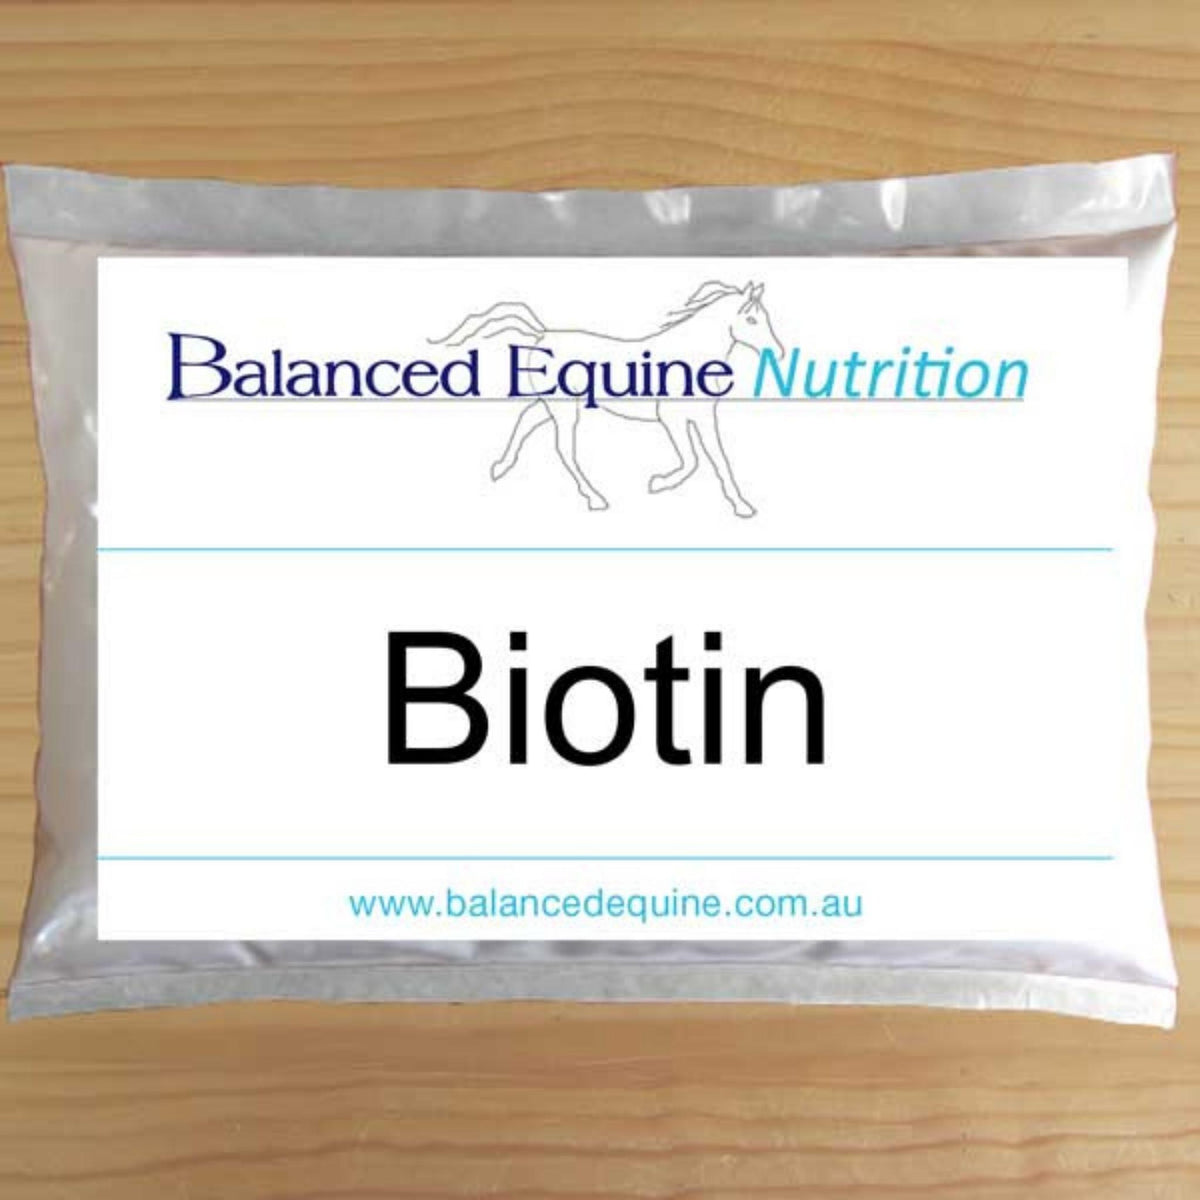 Packet of Biotin, with label stating &quot;Balanced Equine Nutrition - Biotin&quot;.